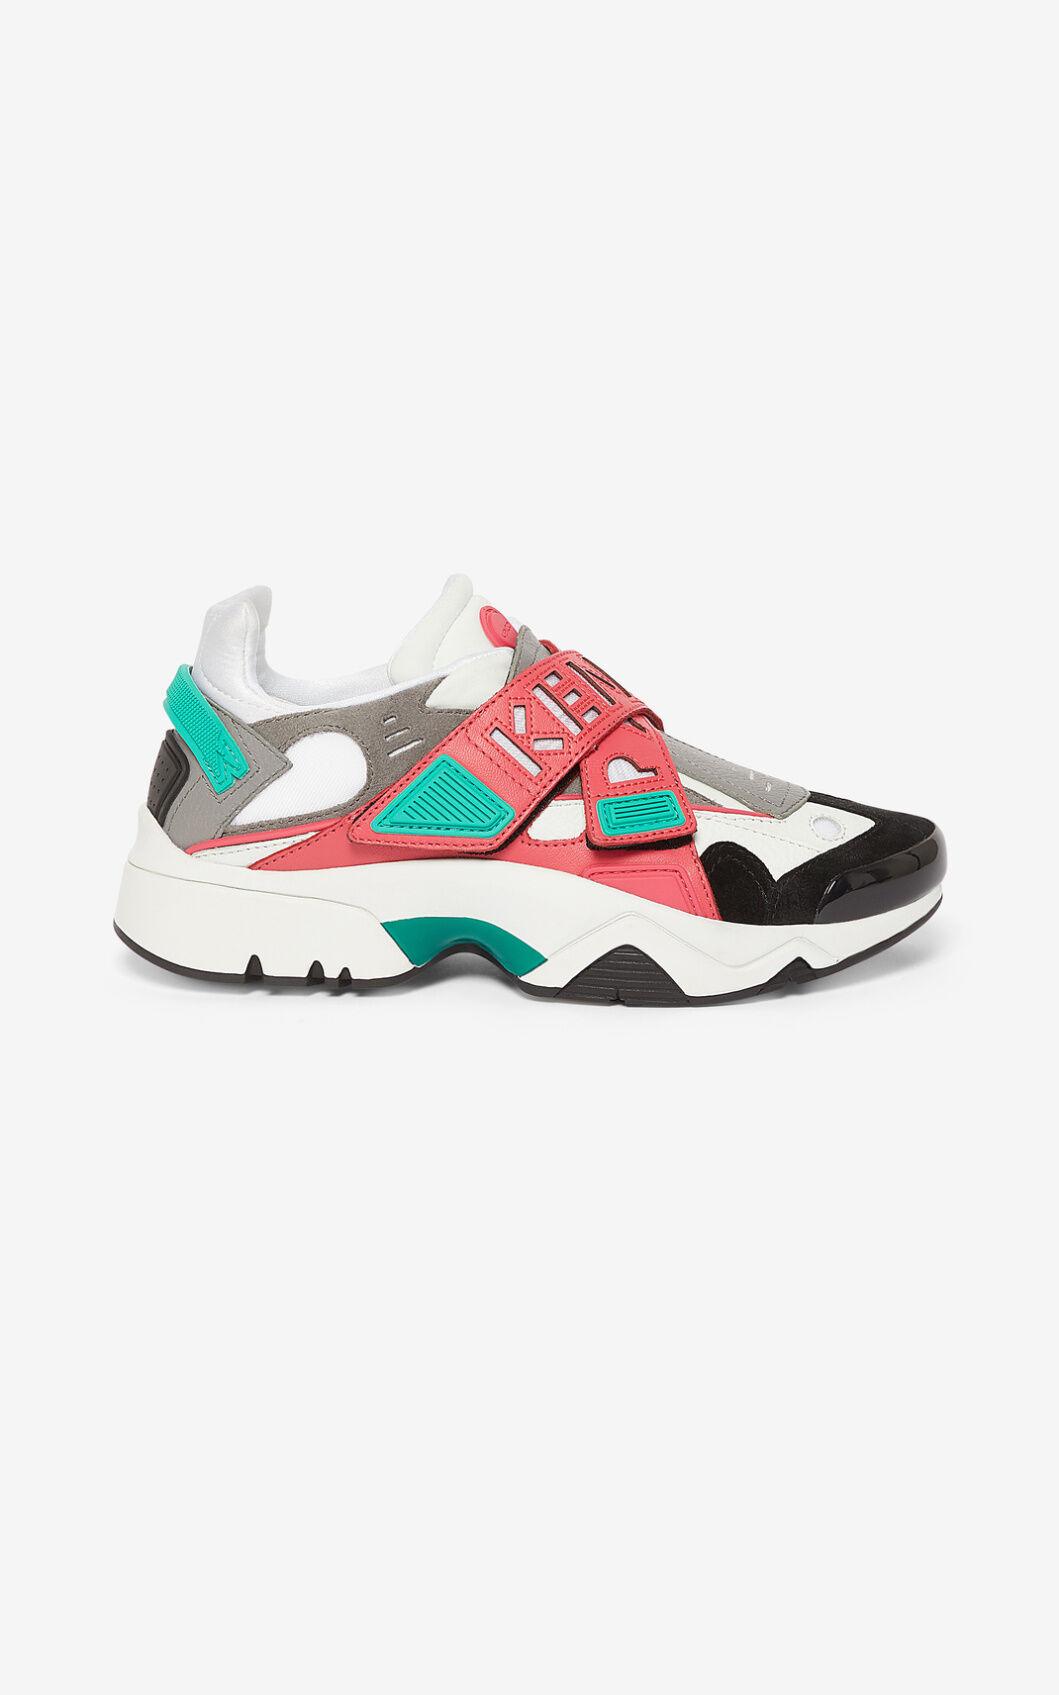 KENZO Rubber Women's Sonic Scratch Trainer Coral - Lyst